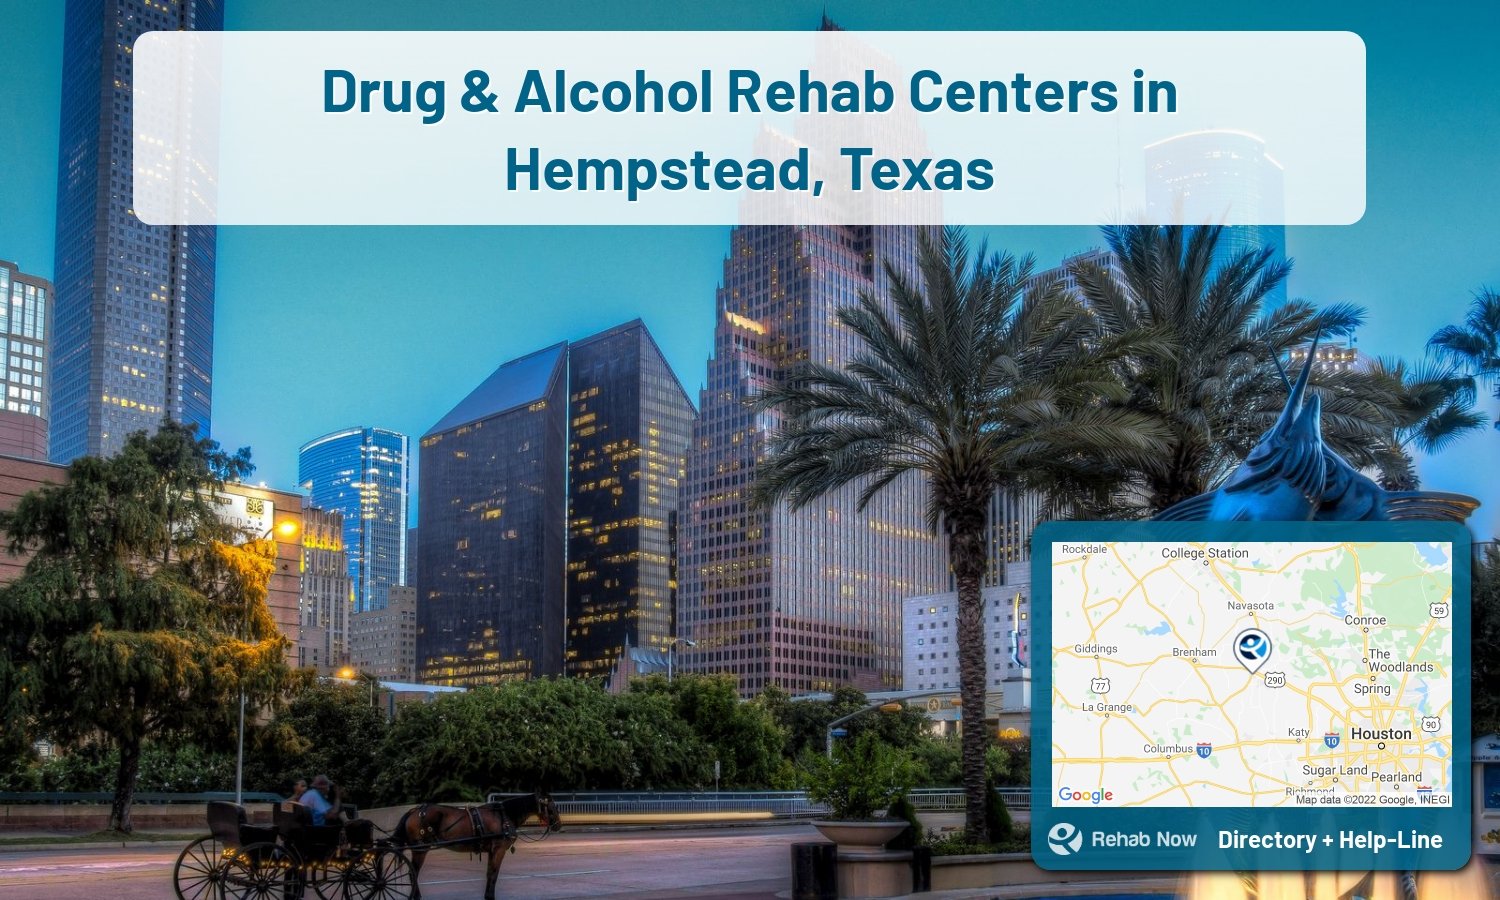 Our experts can help you find treatment now in Hempstead, Texas. We list drug rehab and alcohol centers in Texas.